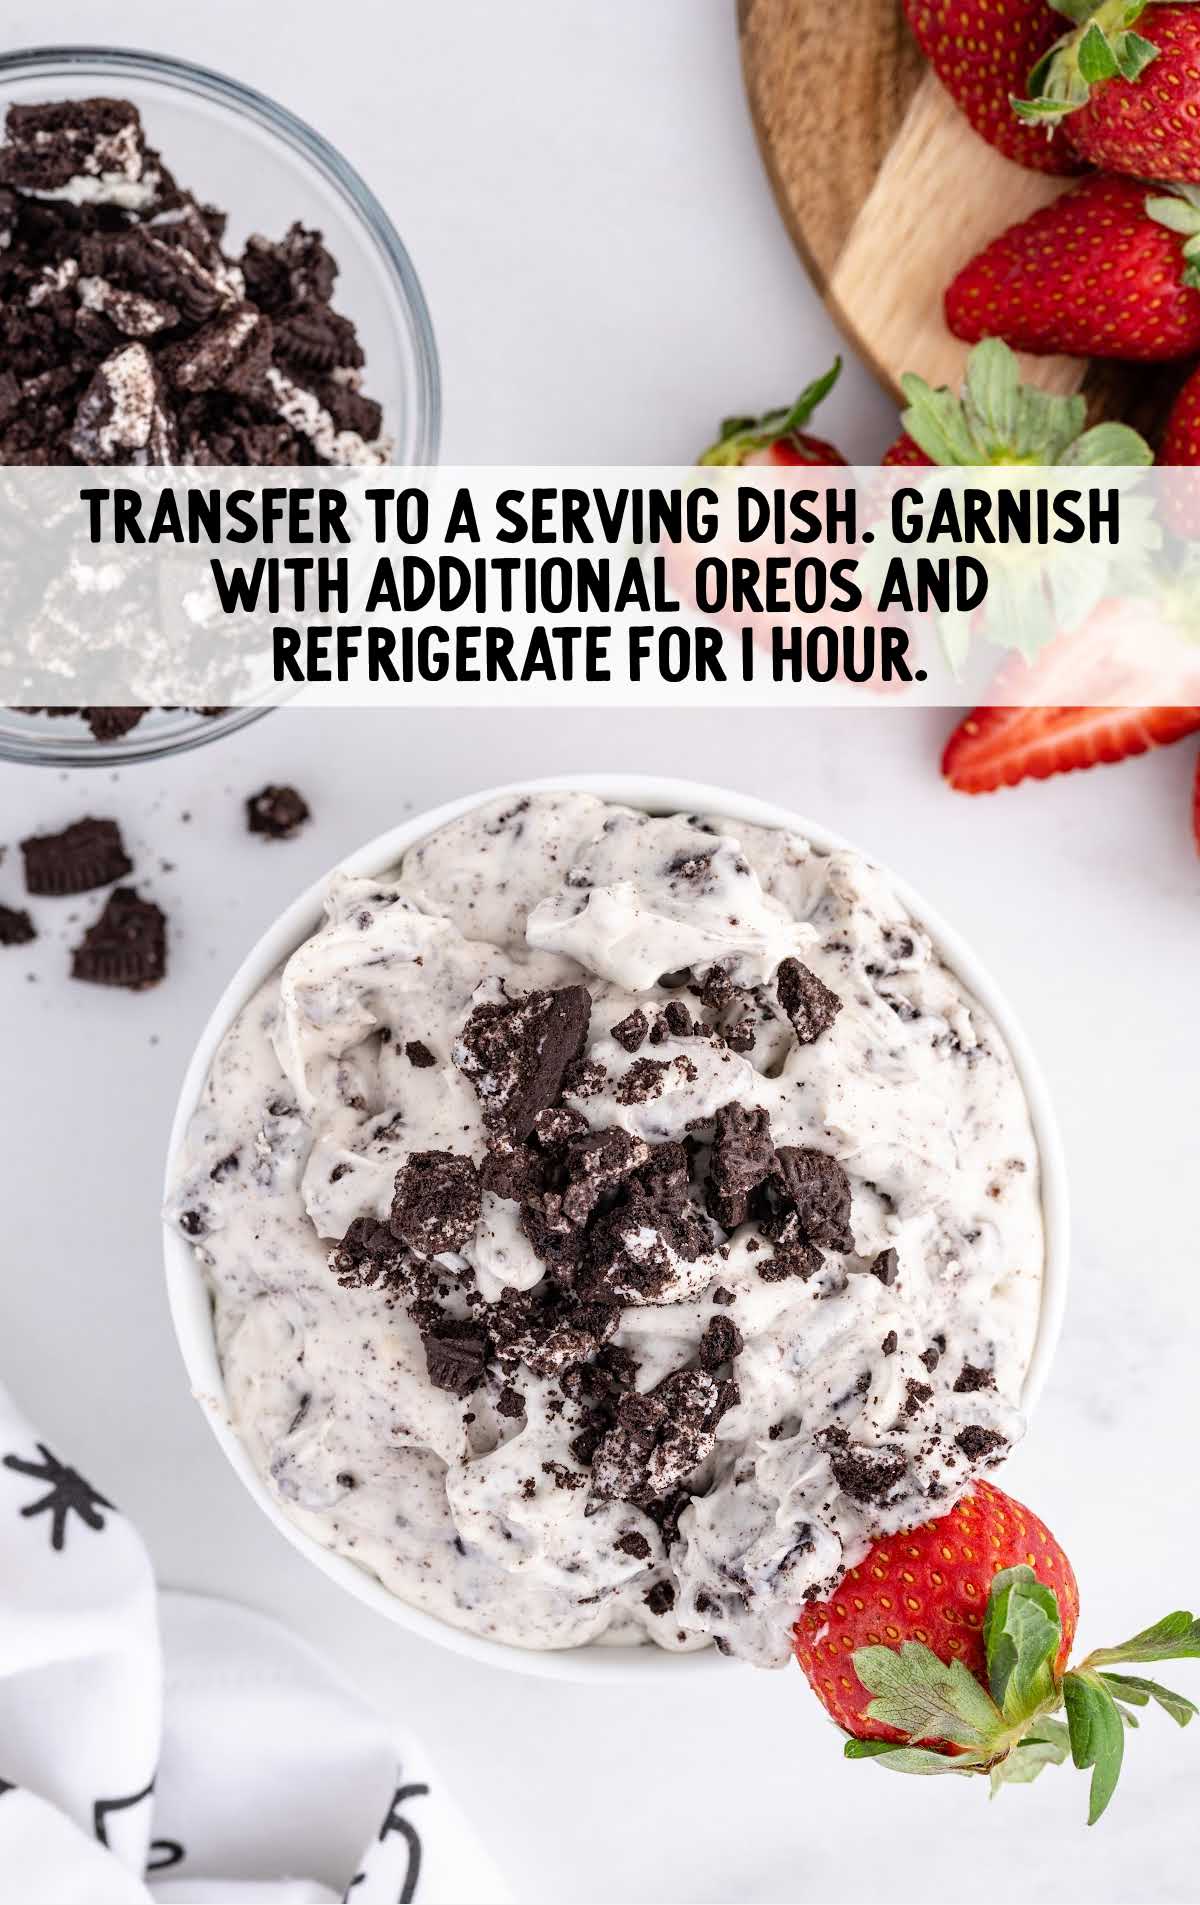 Oreos garnished on top of the dip